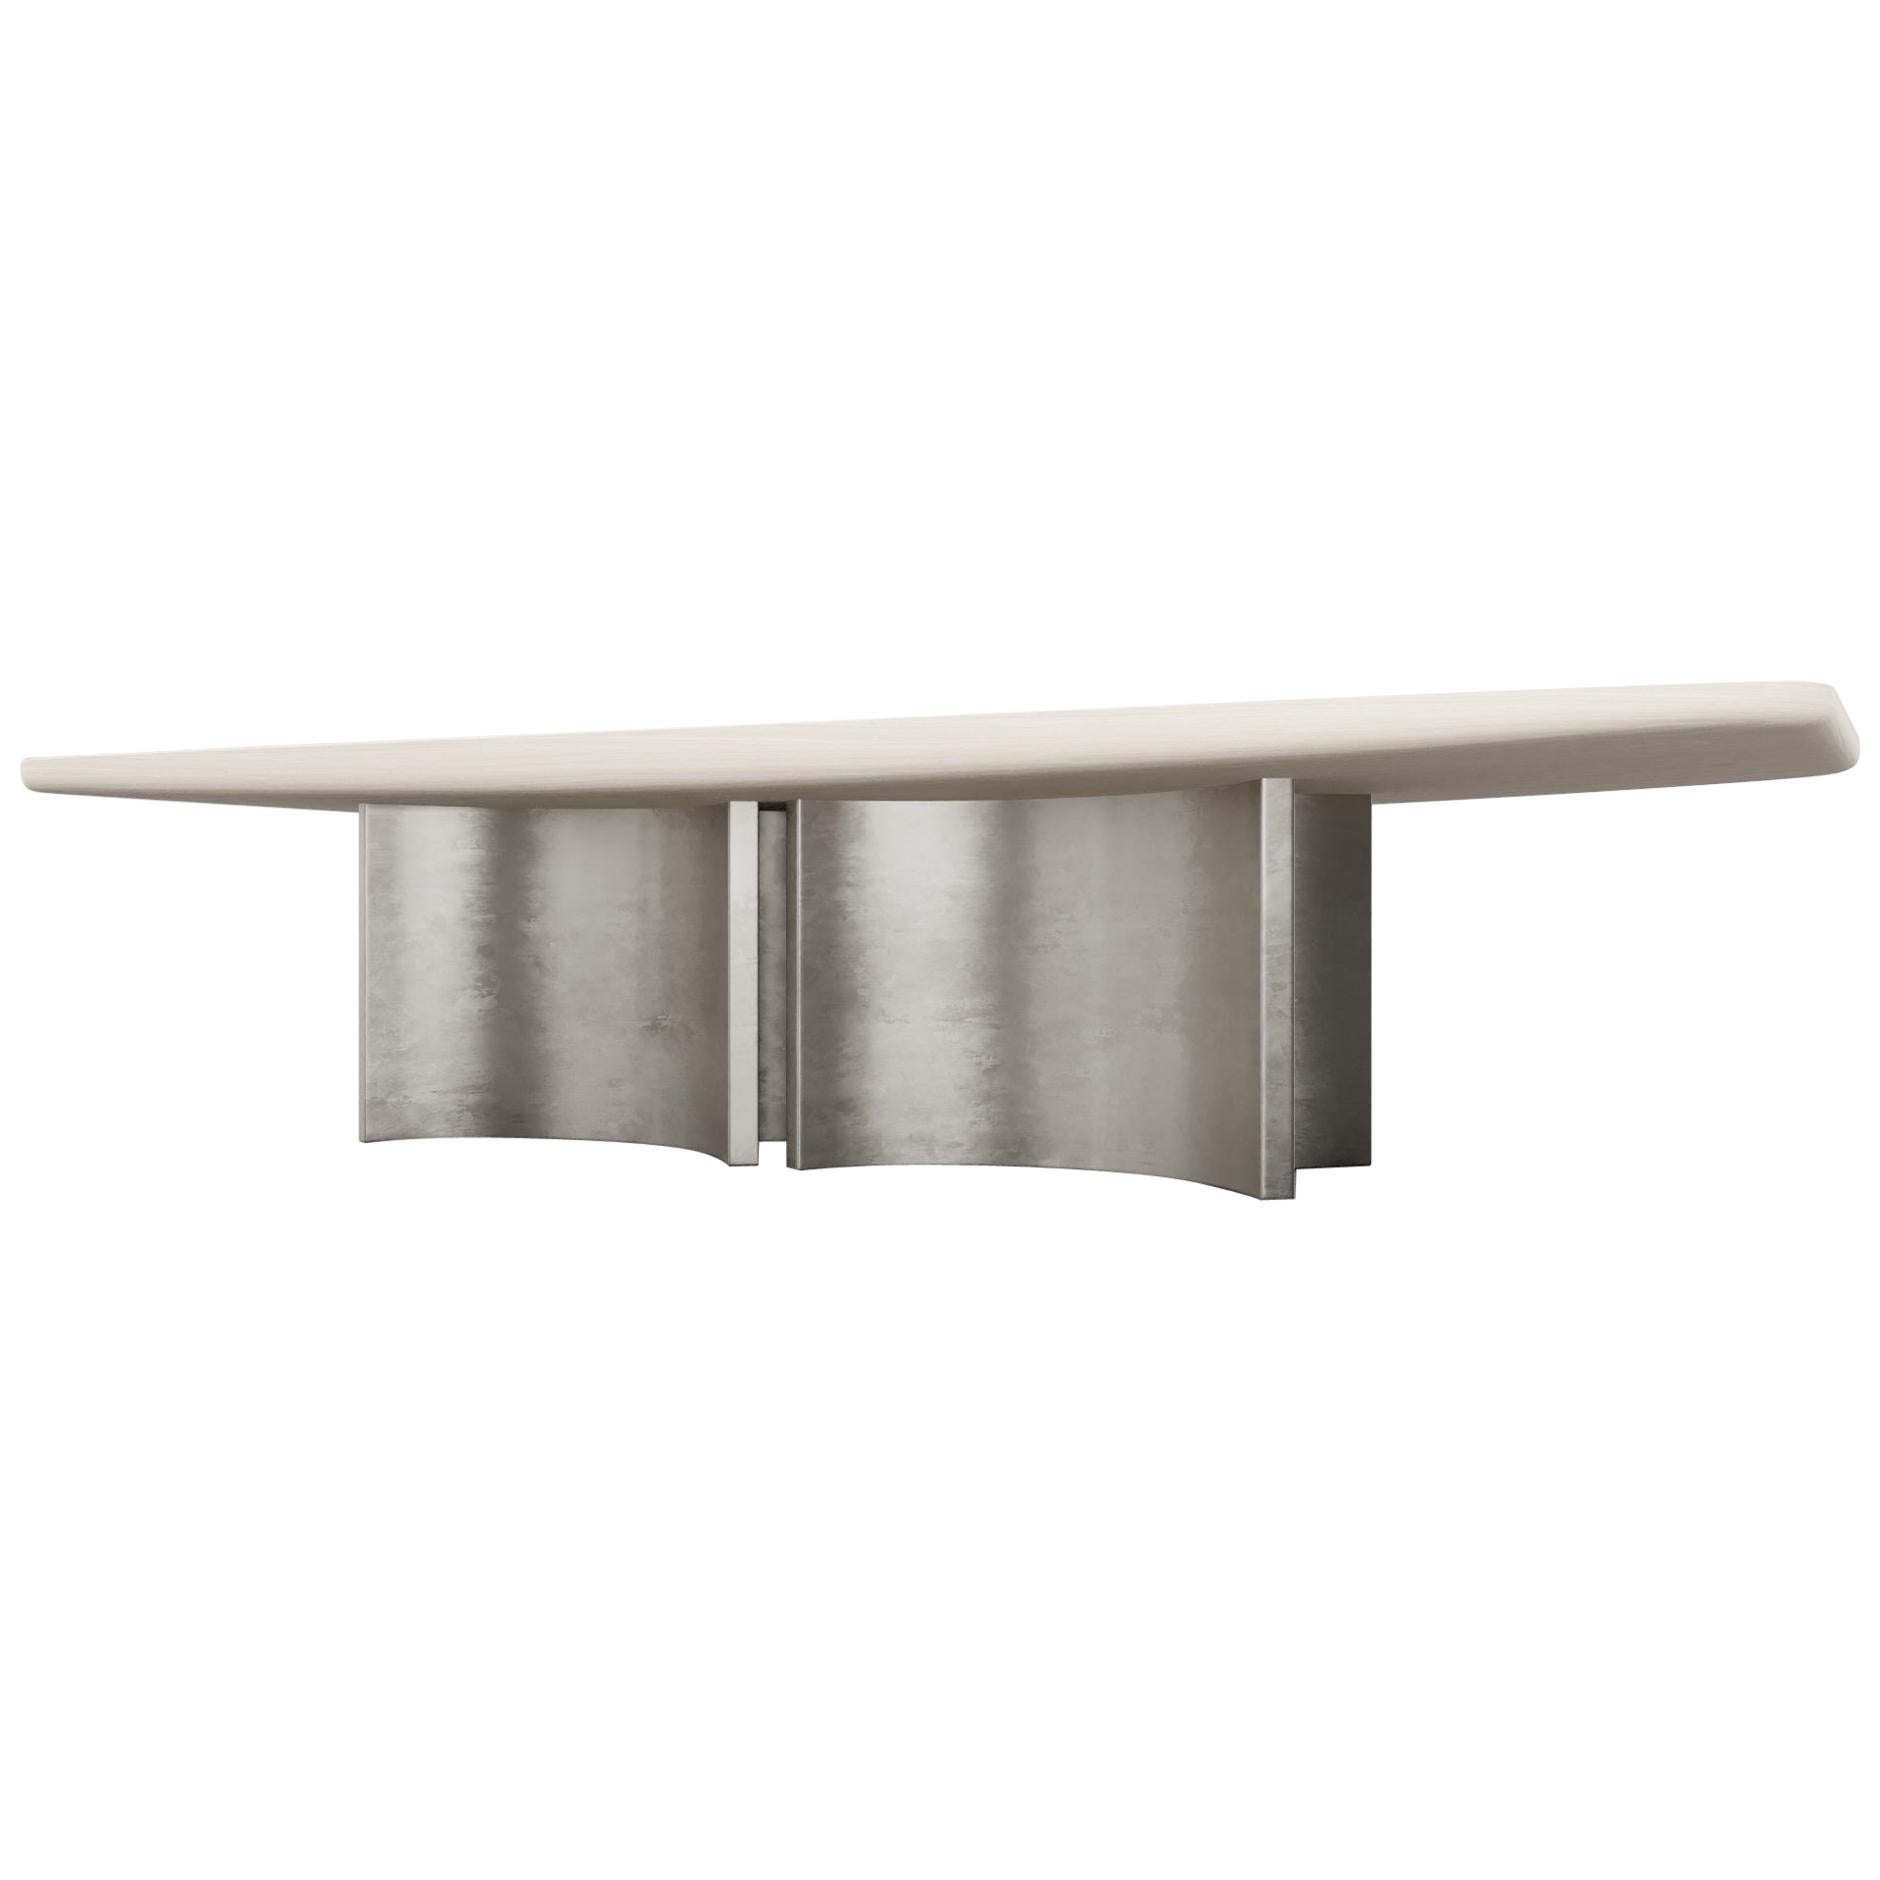 FLOAT DINING TABLE - Modern Wooden Dining Table with Silver Bases